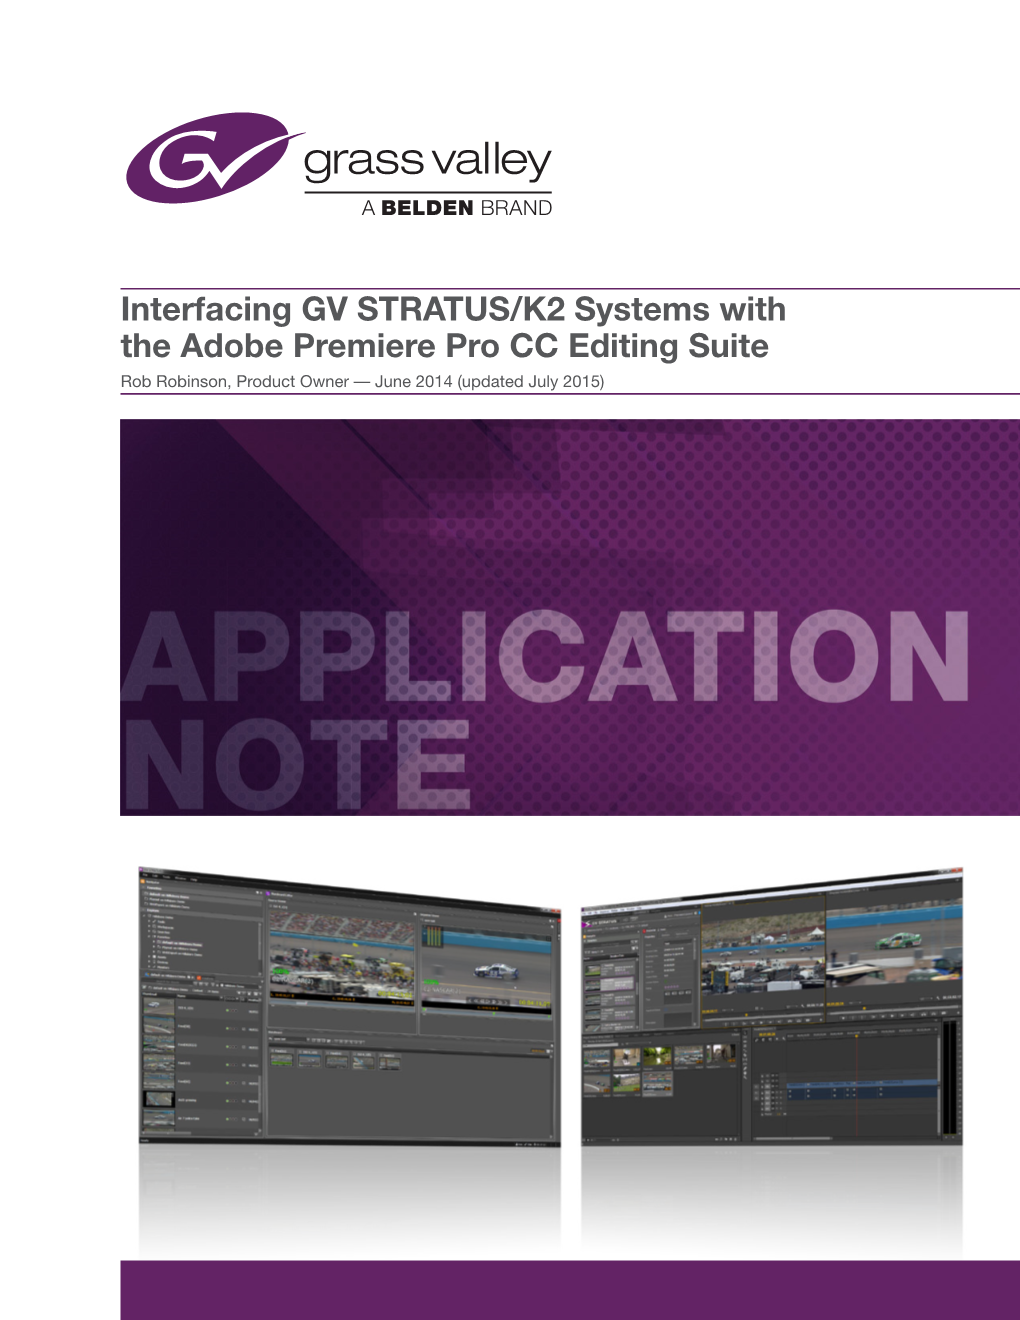 Interfacing GV STRATUS/K2 Systems with the Adobe Premiere Pro CC